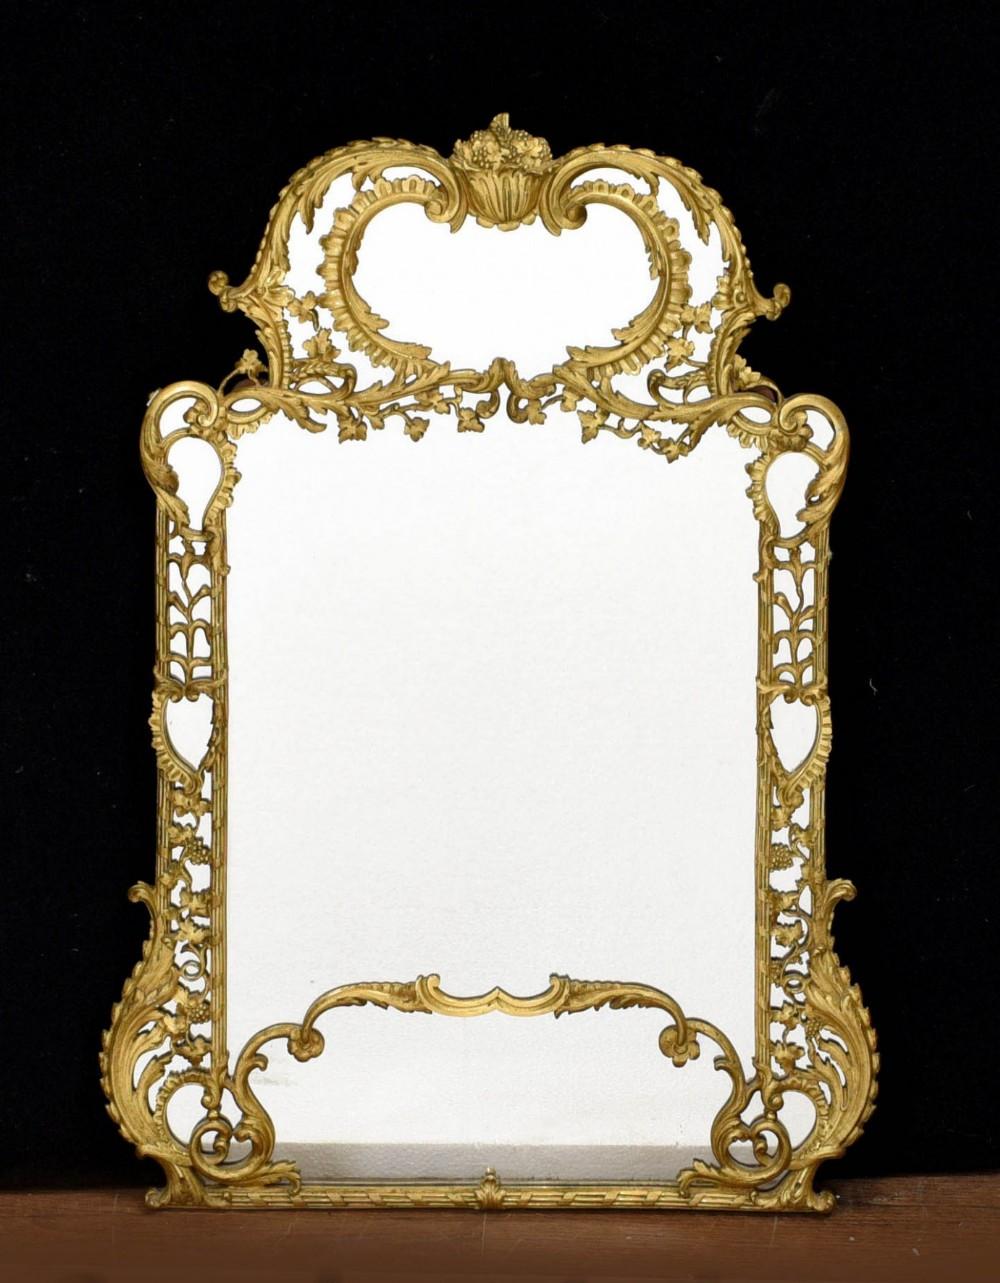 - Gorgeous French antique gilt mirror
- Frame is metal gilt so well cast and with great patina
- Bought from a dealer on Marche Biron at Paris antiques markets
- Every interior designers dream
- Offered in great condition, ready for home use